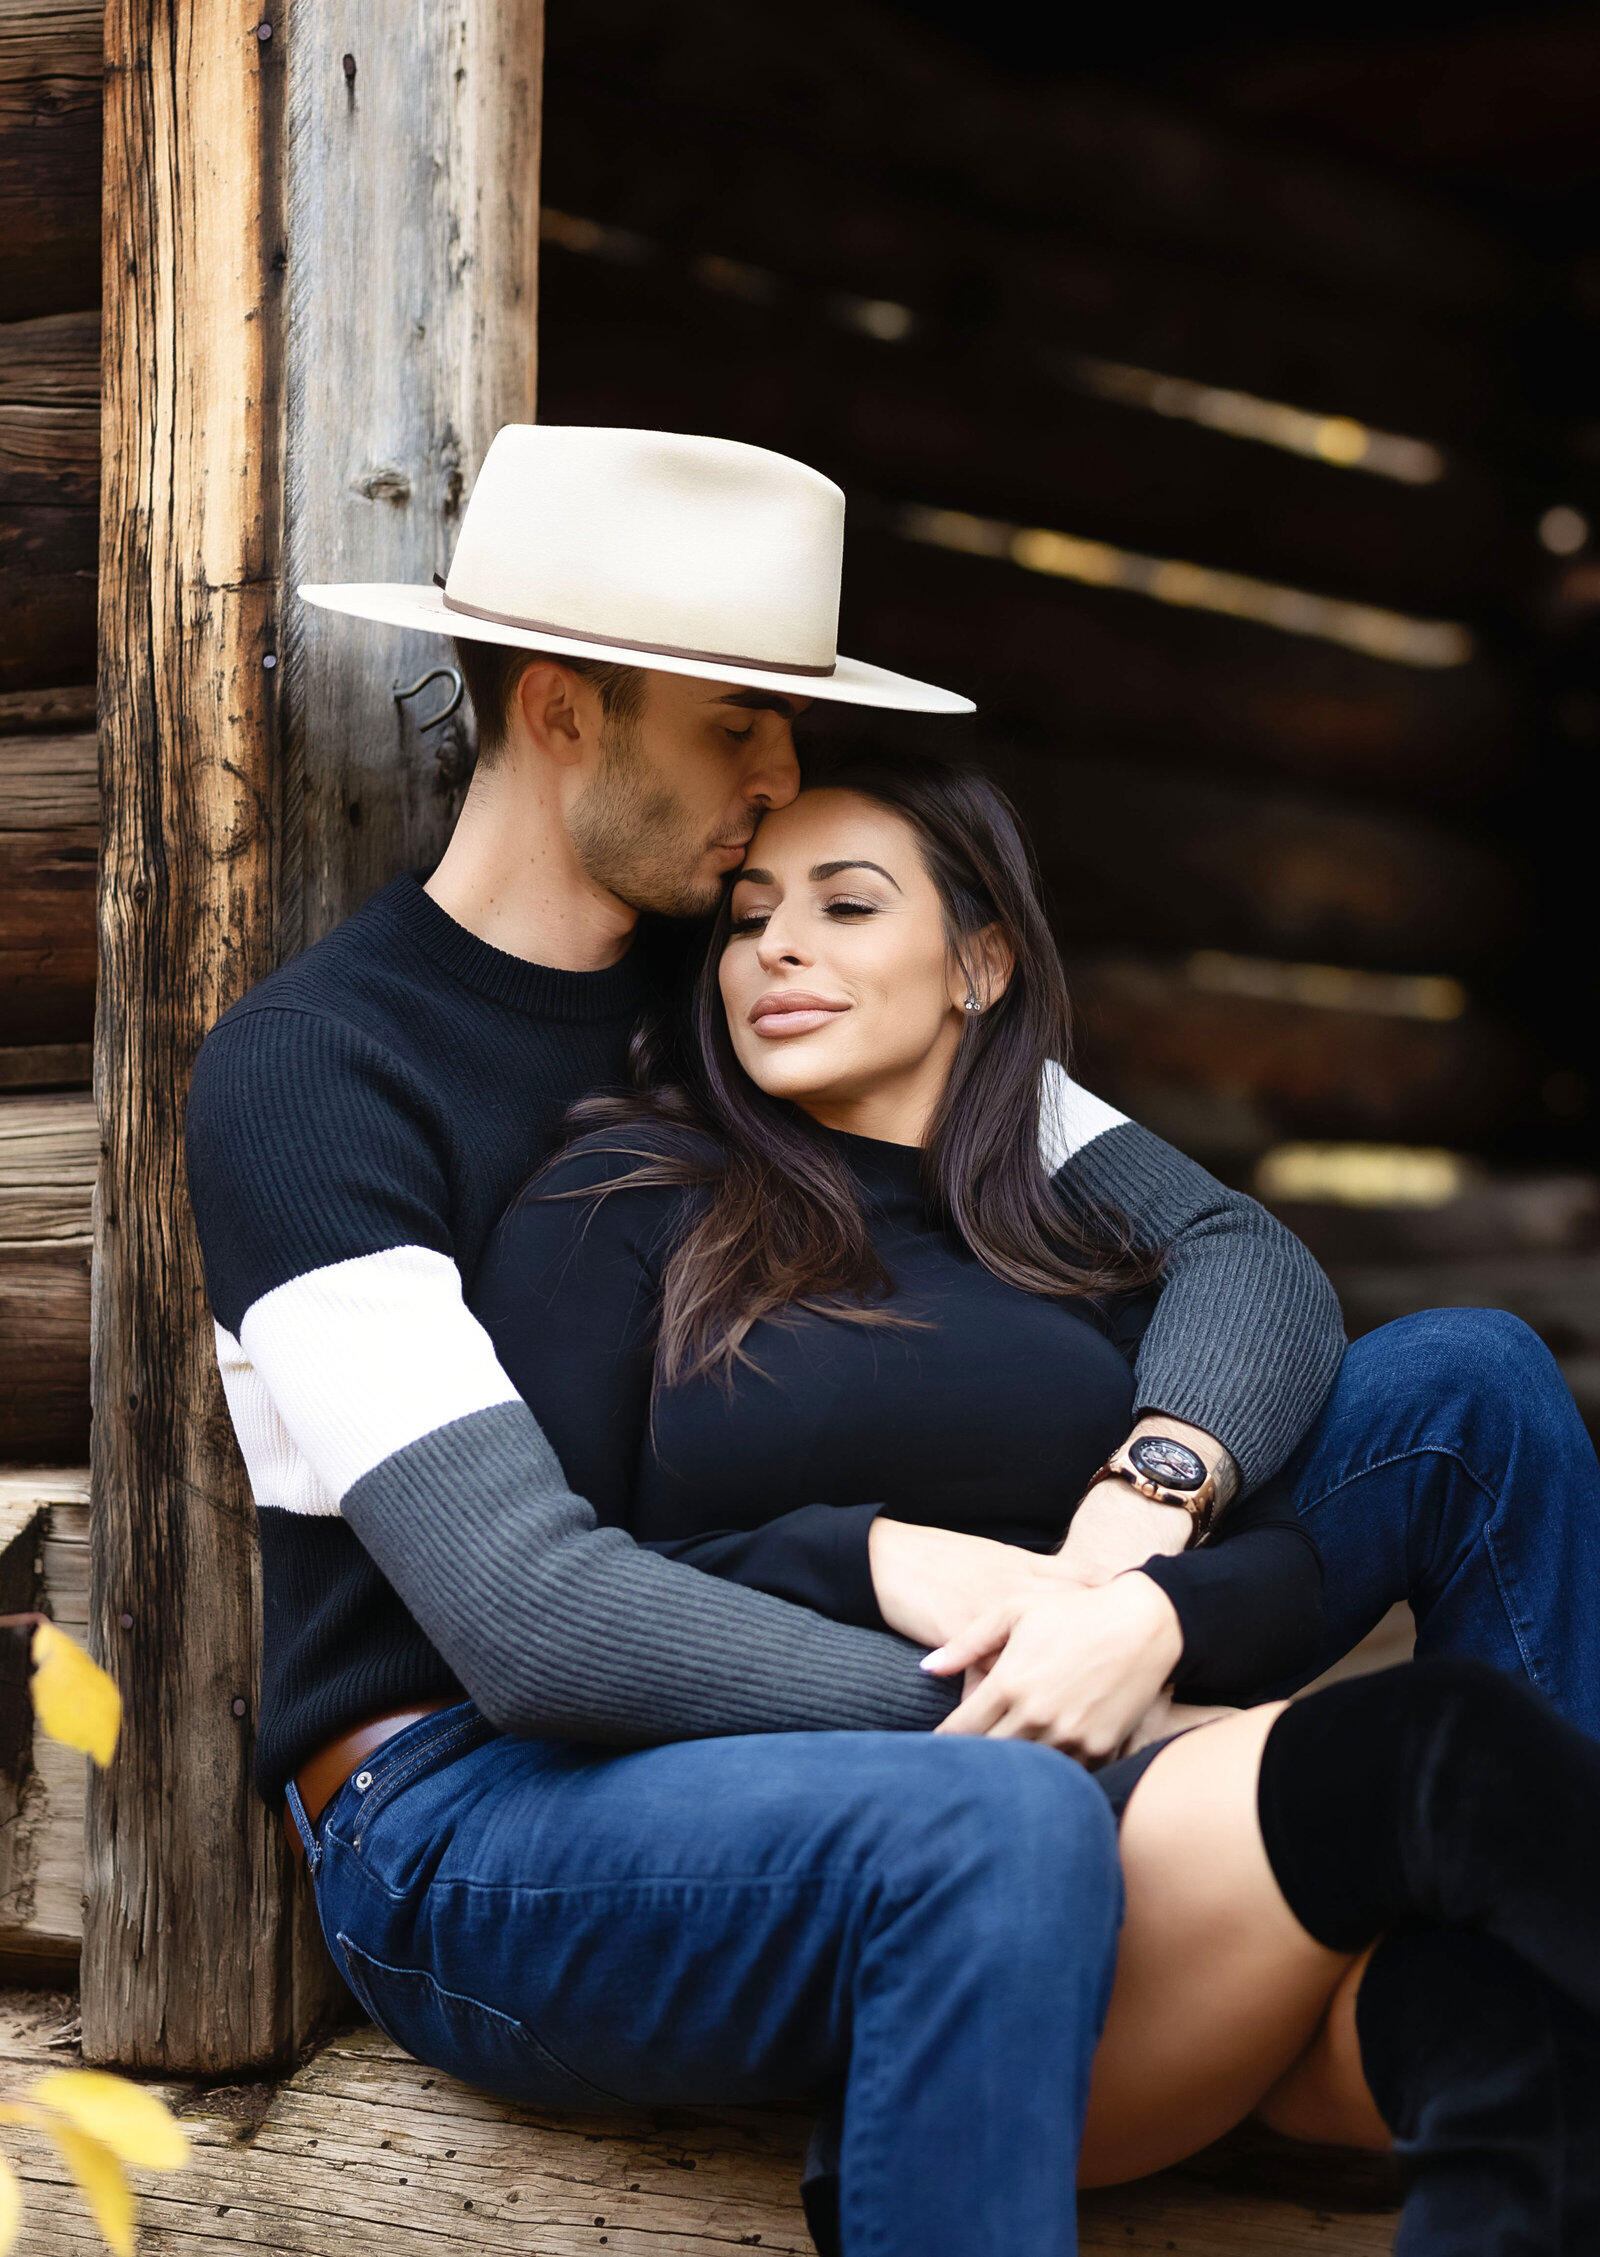 A sweet couple snuggle and kiss at Ashcroft Ghost Town in Aspen, Colorado during their engagement photoshoot.